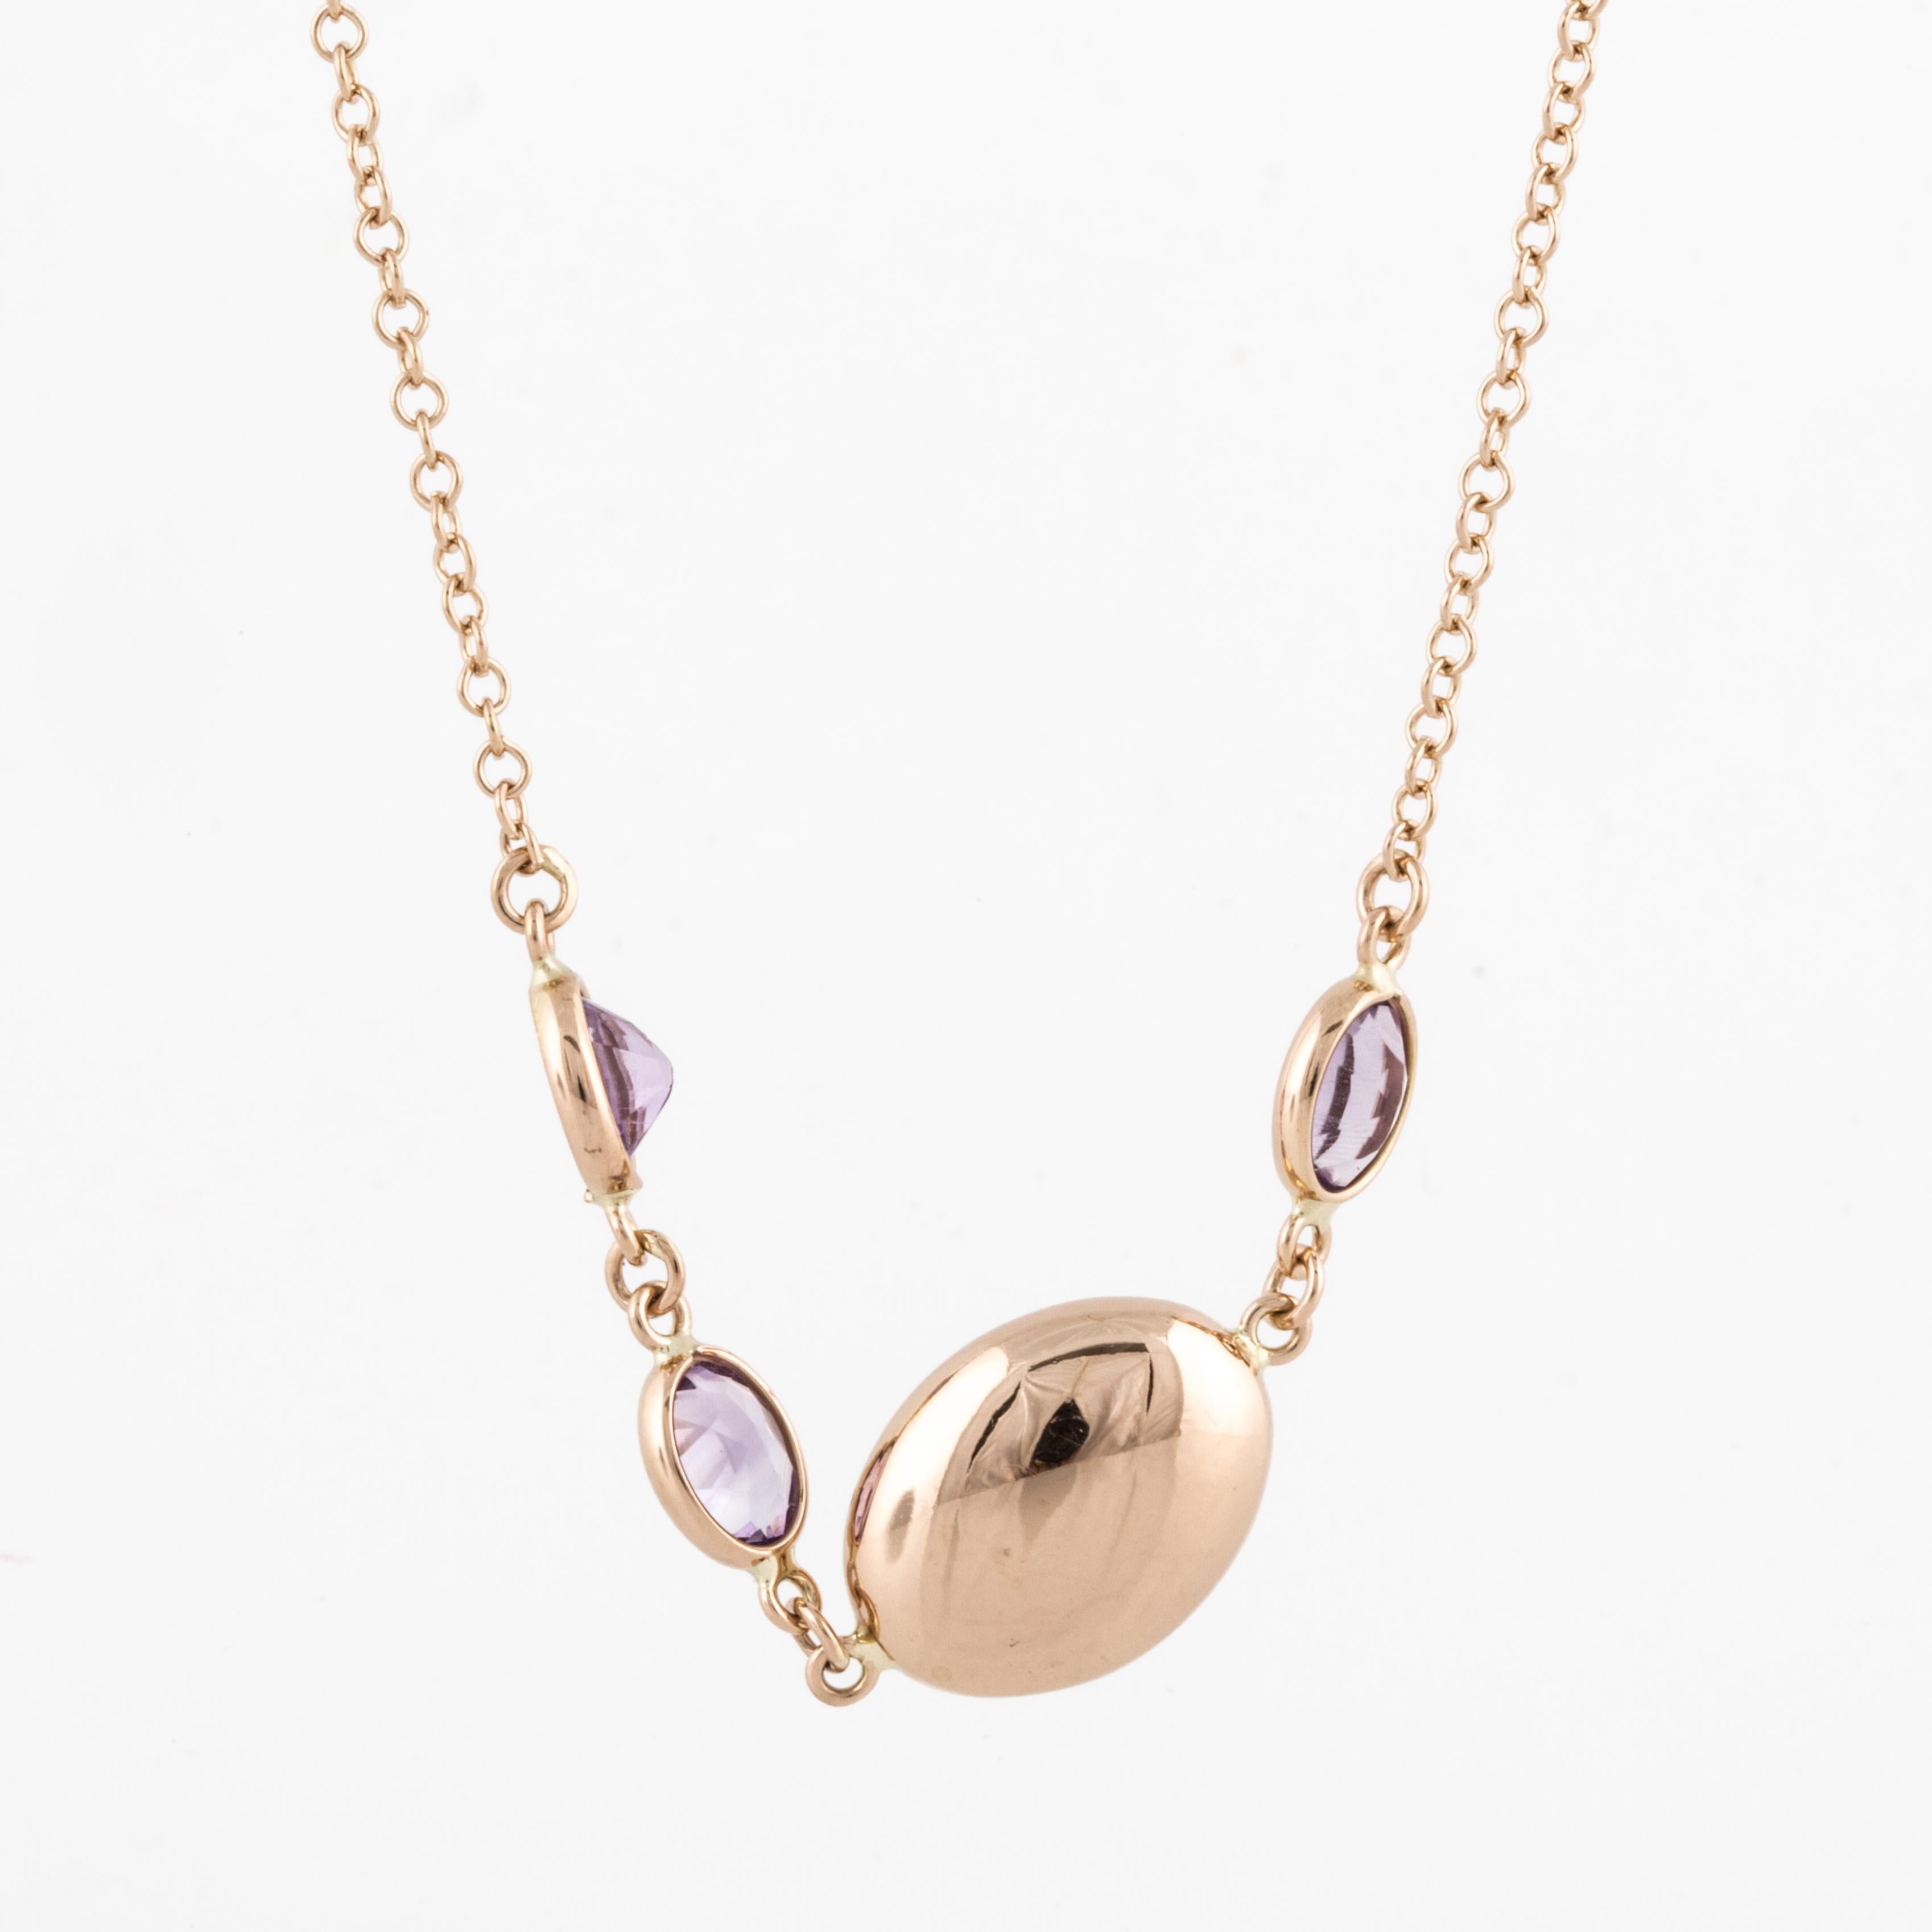 18K rose gold necklace with amethyst stations.  There are a total of 36 faceted amethysts.  Interspersed are oval puffy gold spacers, both large and small.  Measures 45 inches long.